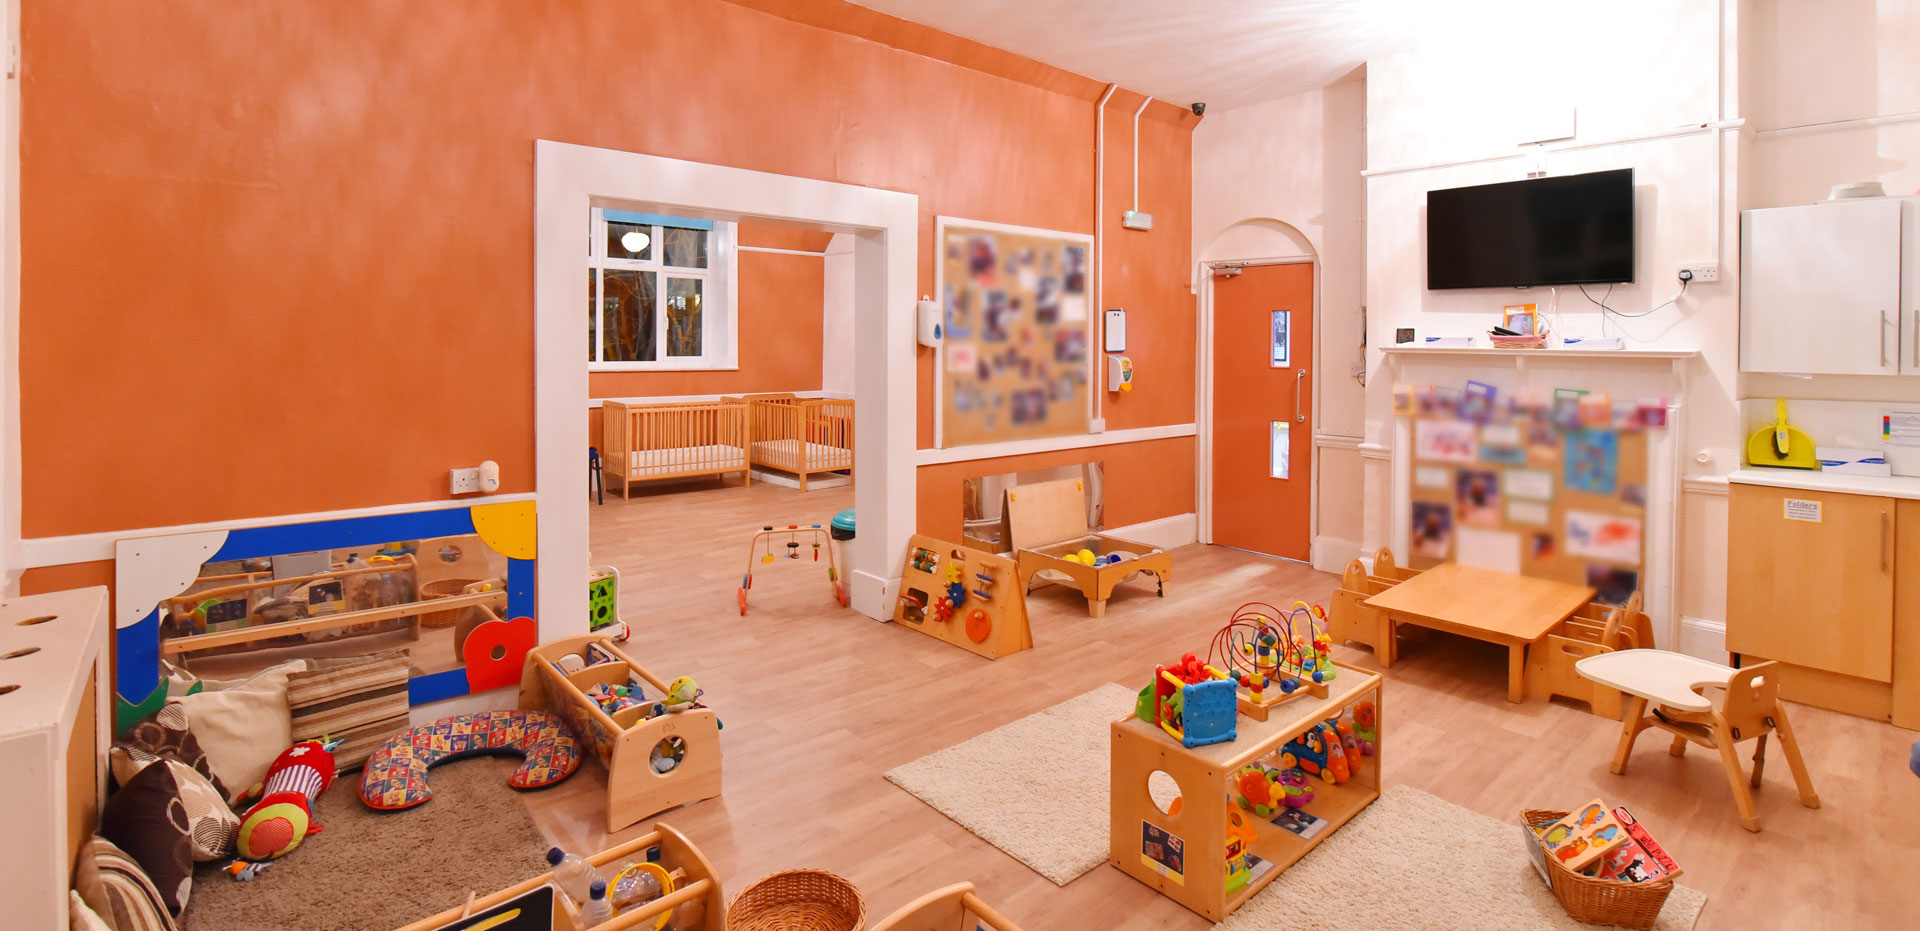 Haslemere Day Nursery and Preschool